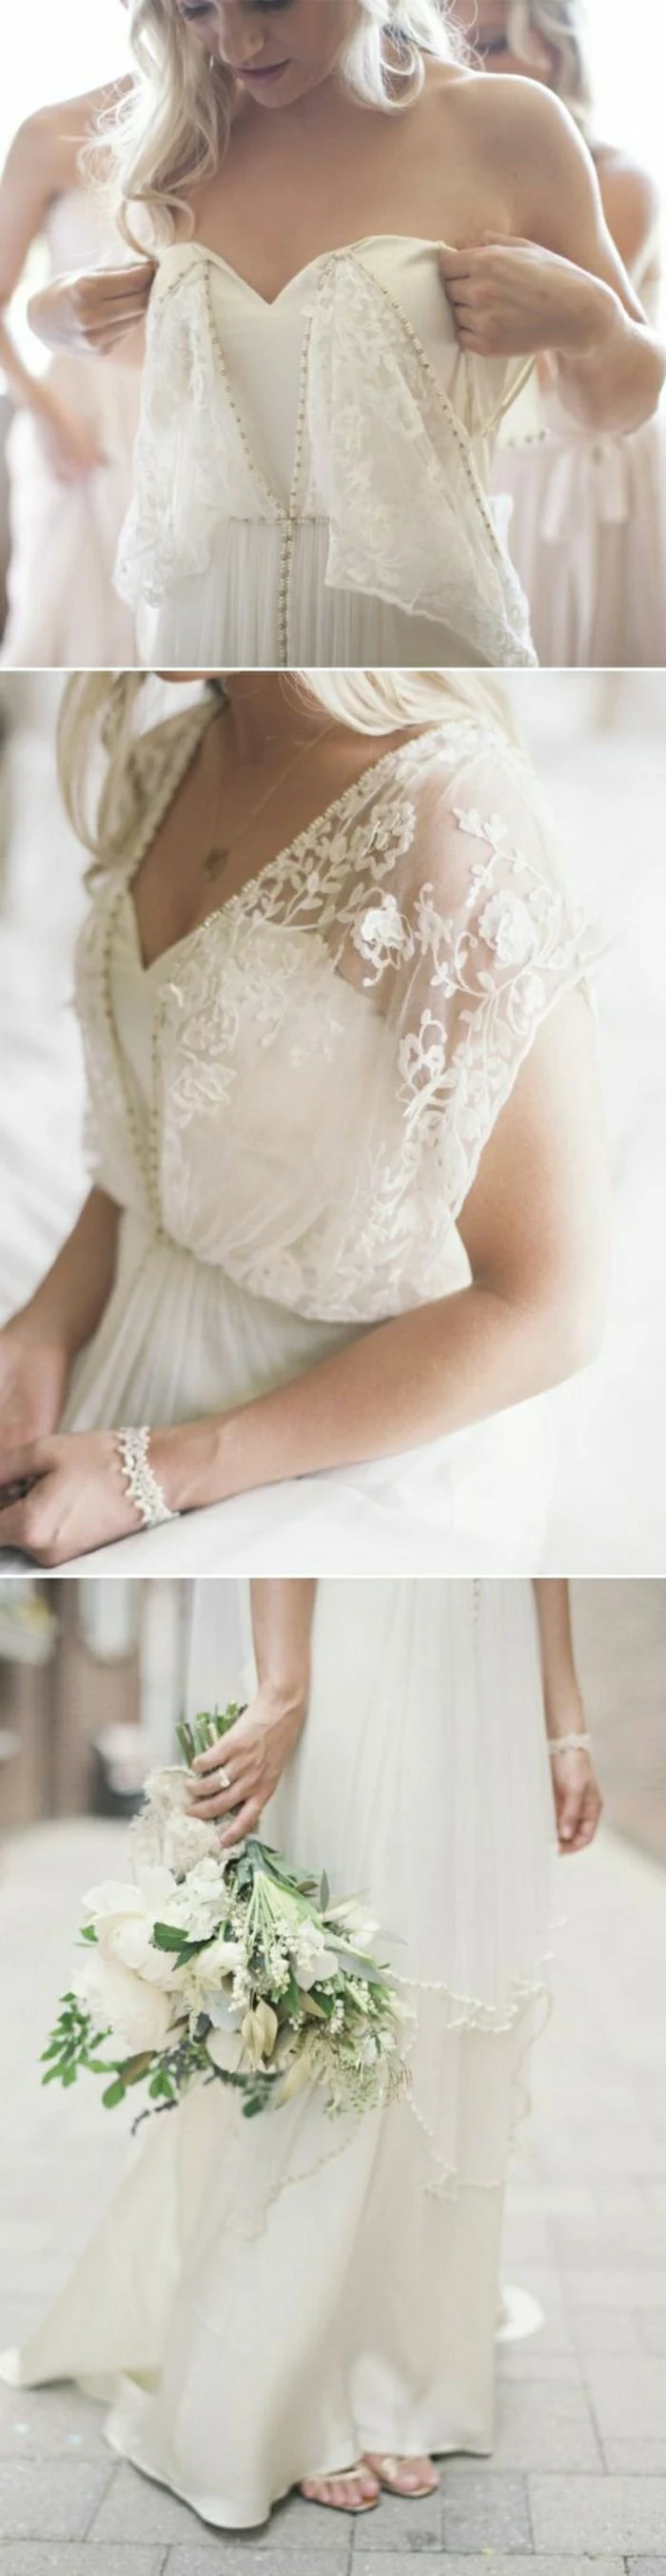 three close-ups of a wedding dress with lace details, worn by a blonde young bride, with a white bracelet, holding a bouquet of white flowers